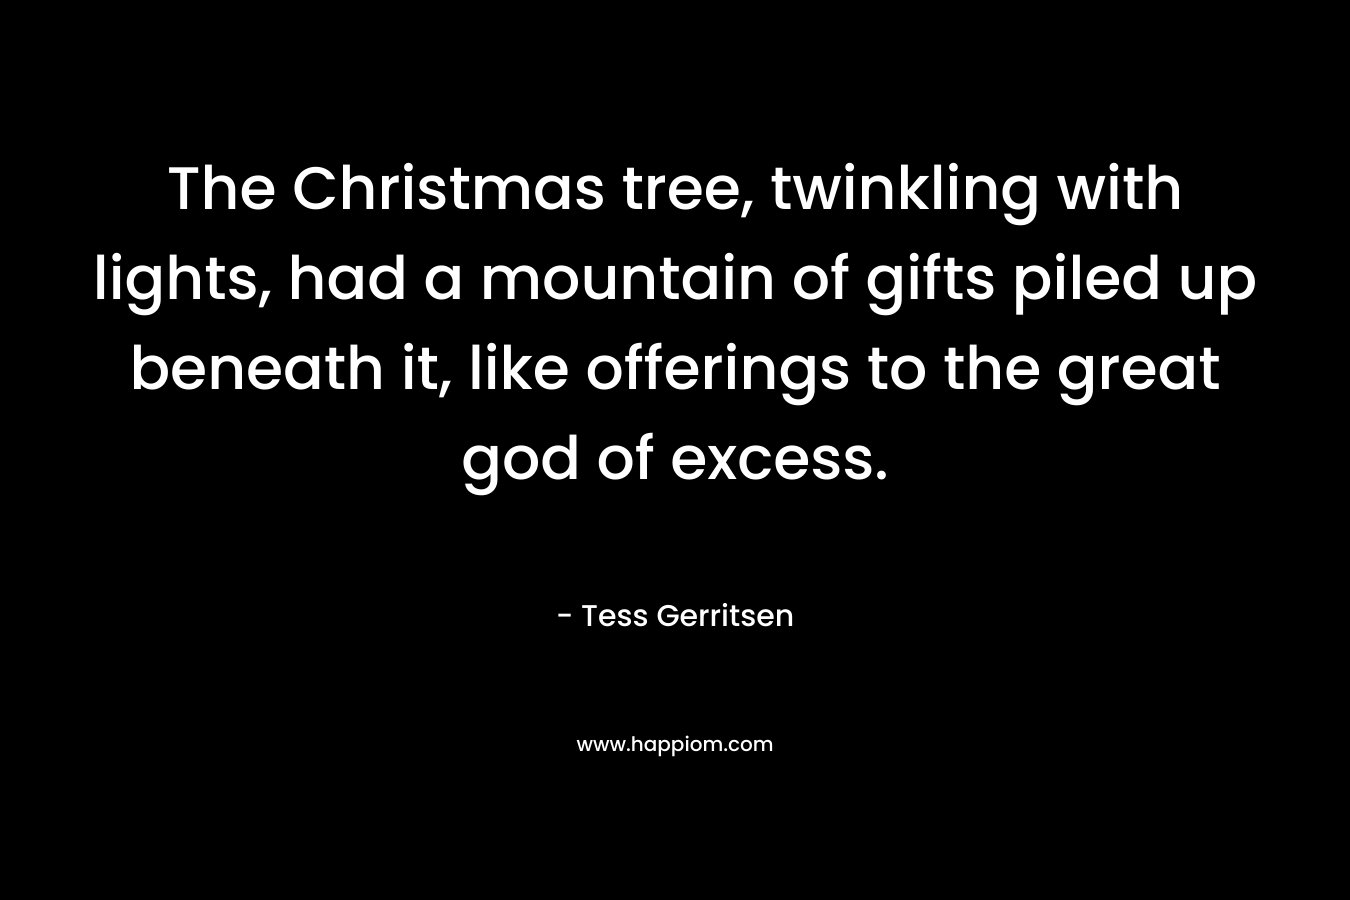 The Christmas tree, twinkling with lights, had a mountain of gifts piled up beneath it, like offerings to the great god of excess. – Tess Gerritsen